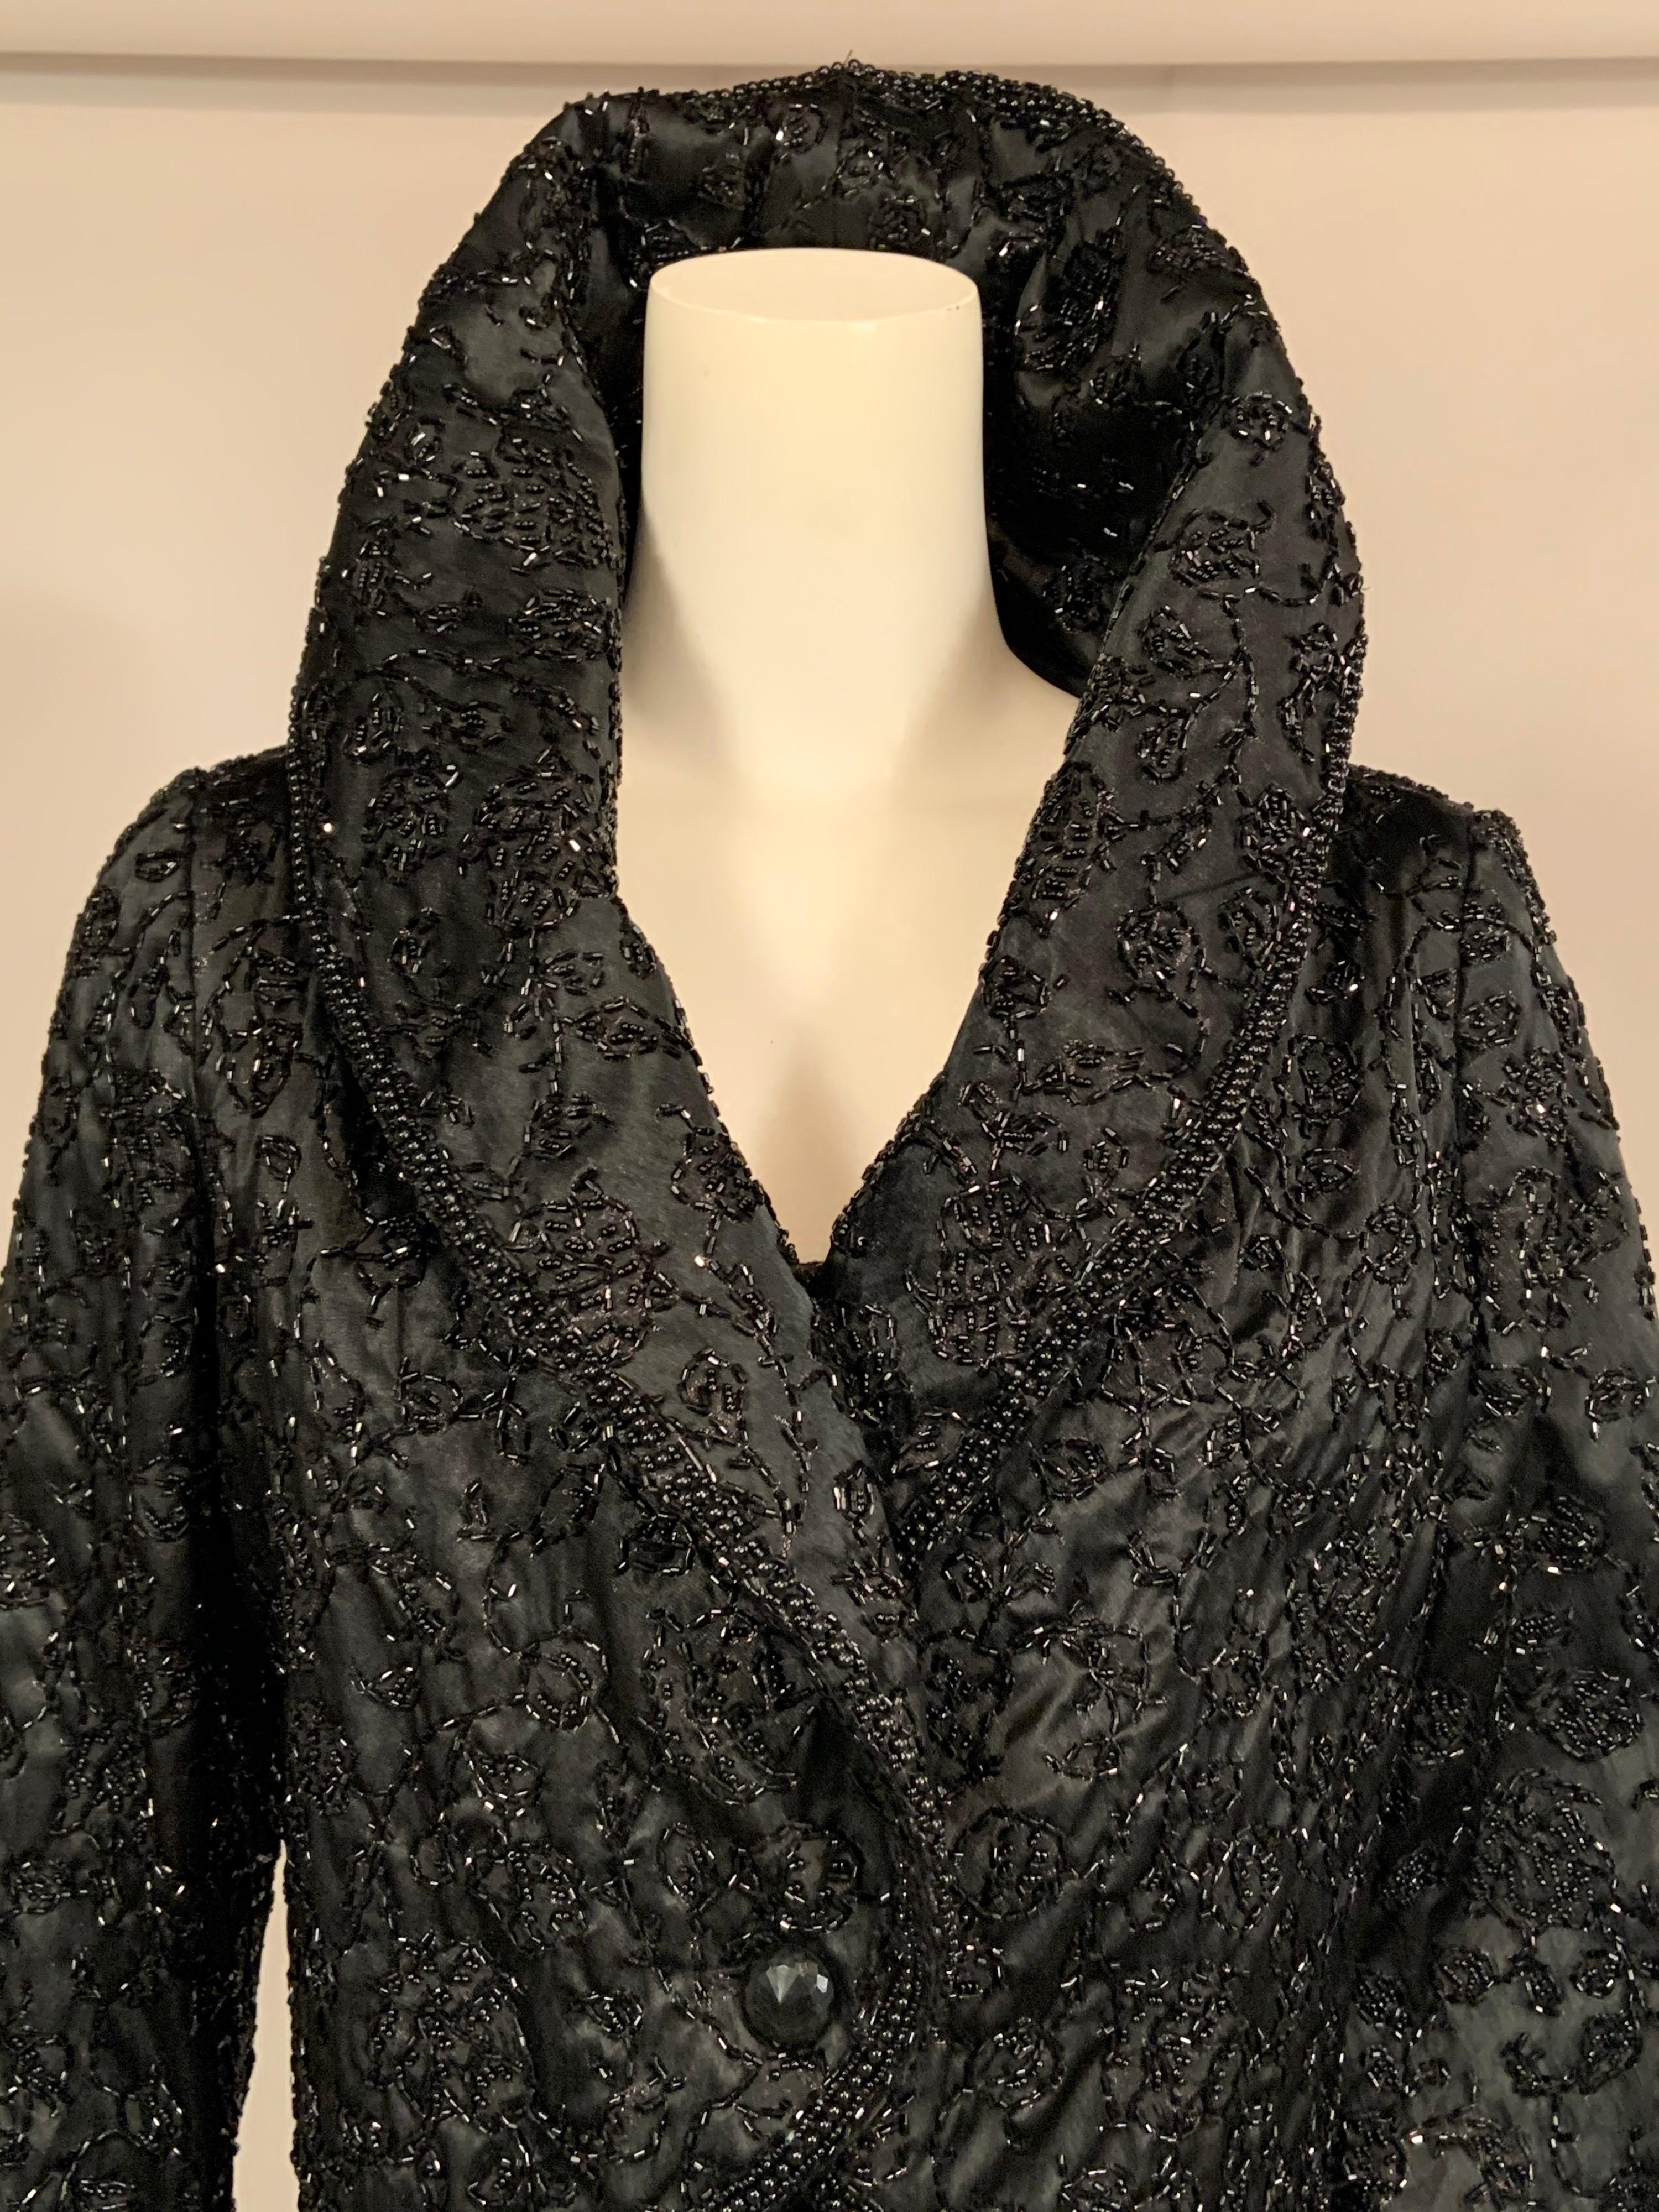 Elaborately Beaded Strapless Black Cocktail Dress and Jacket  circa 1950 In Excellent Condition For Sale In New Hope, PA